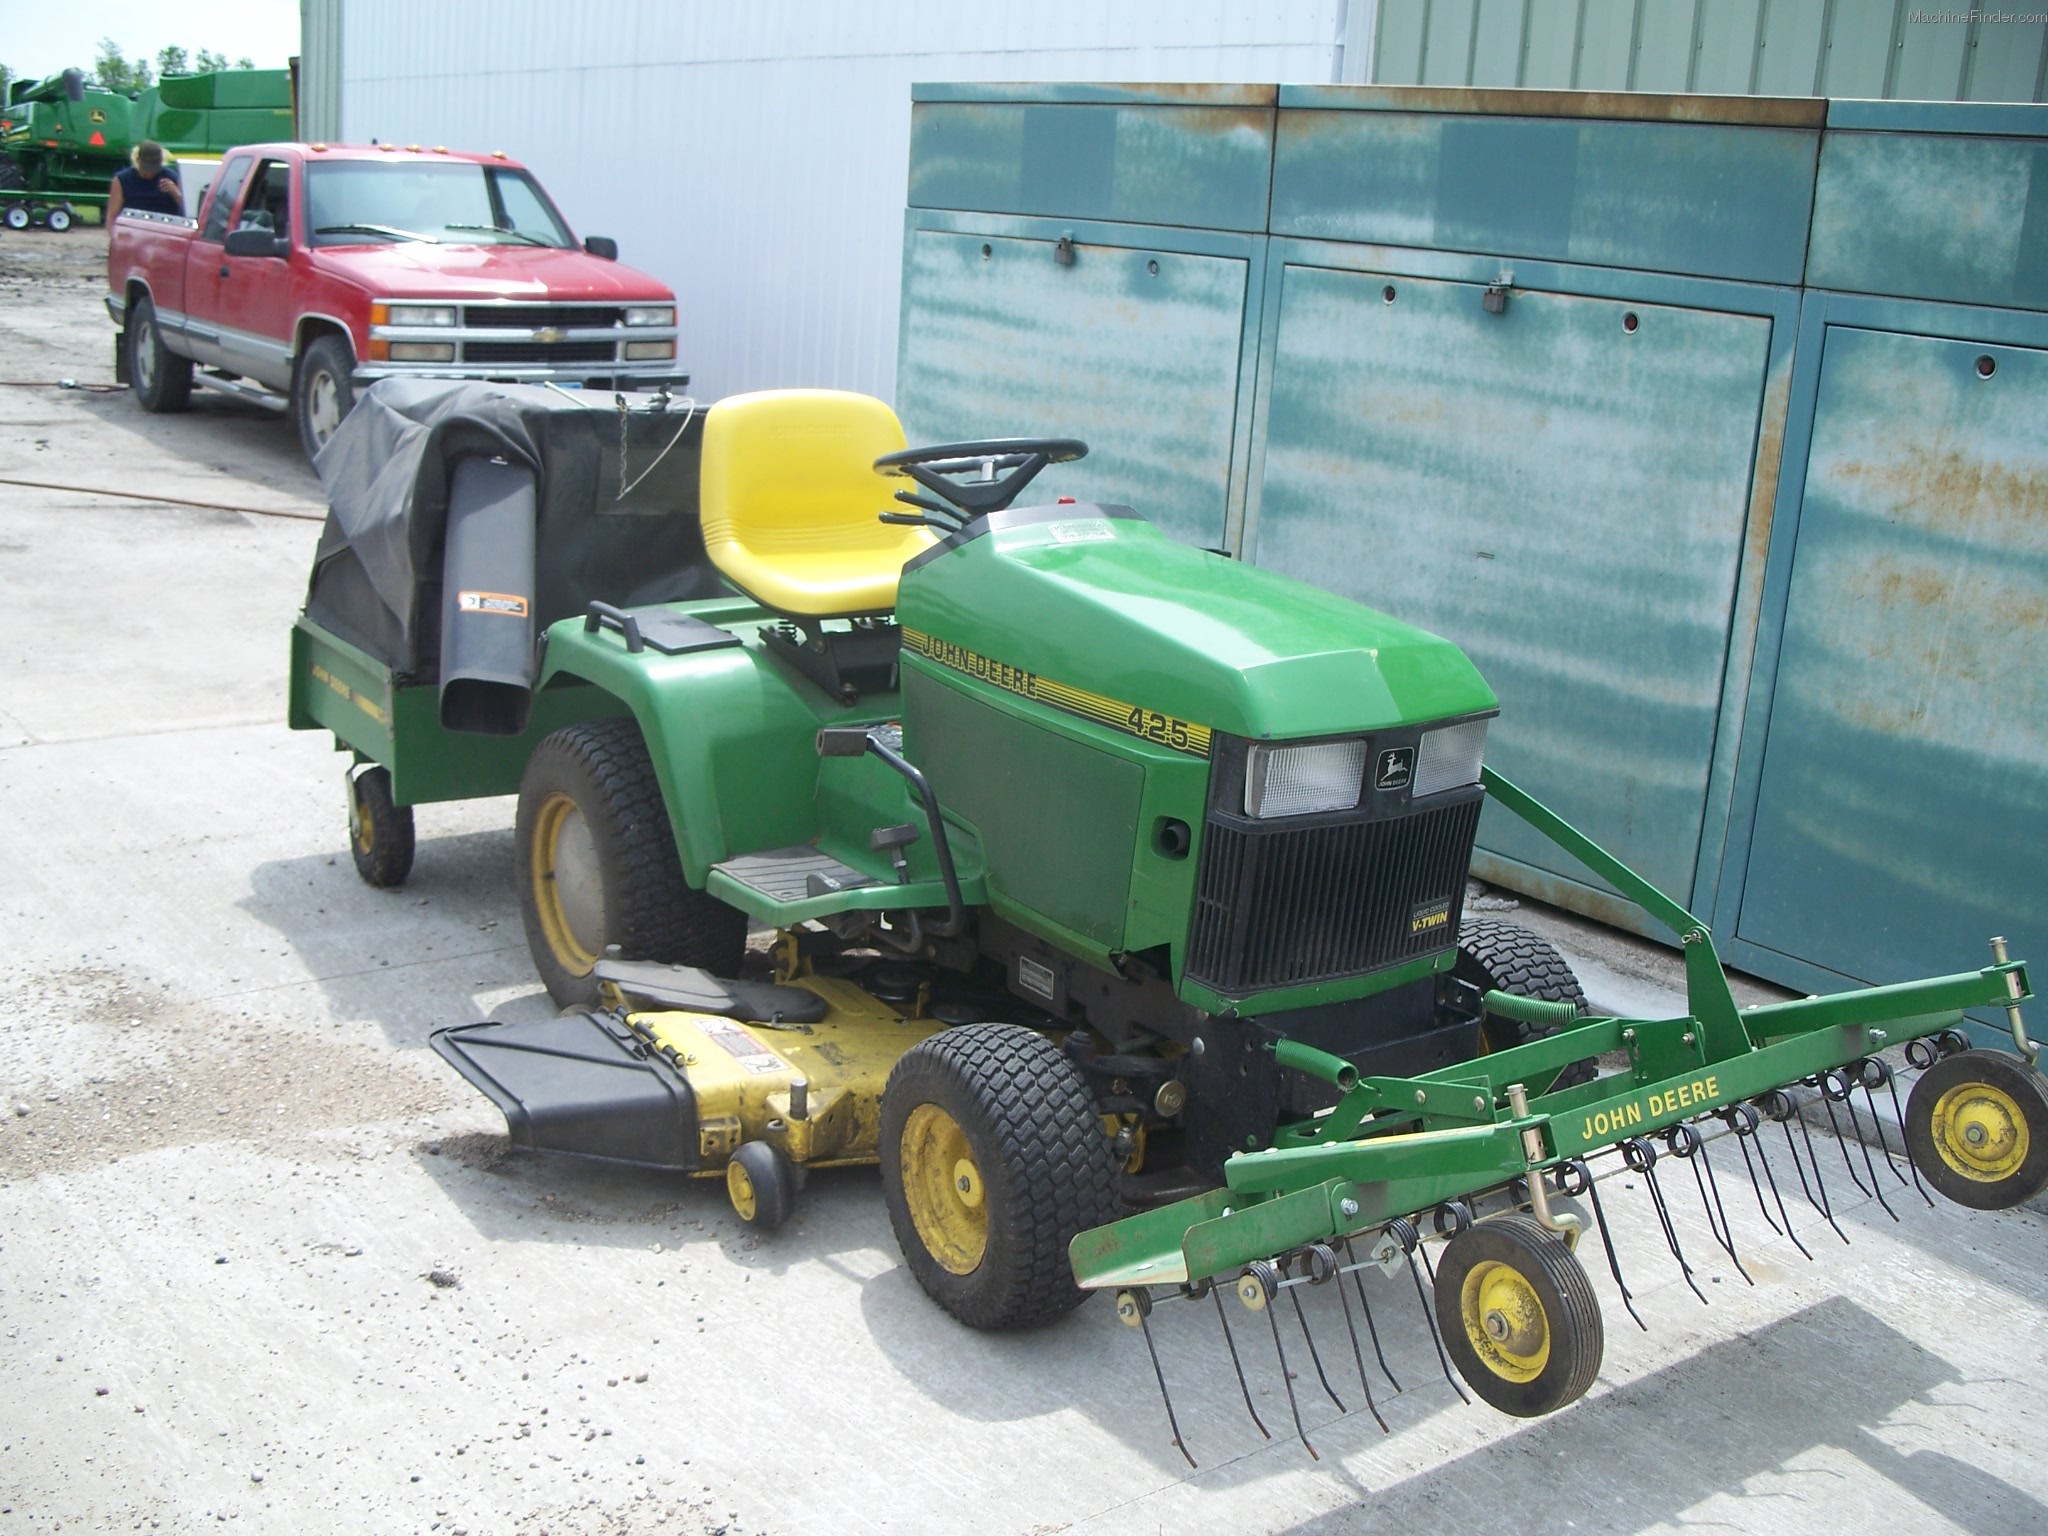 John Deere 425 Attachments submited images.